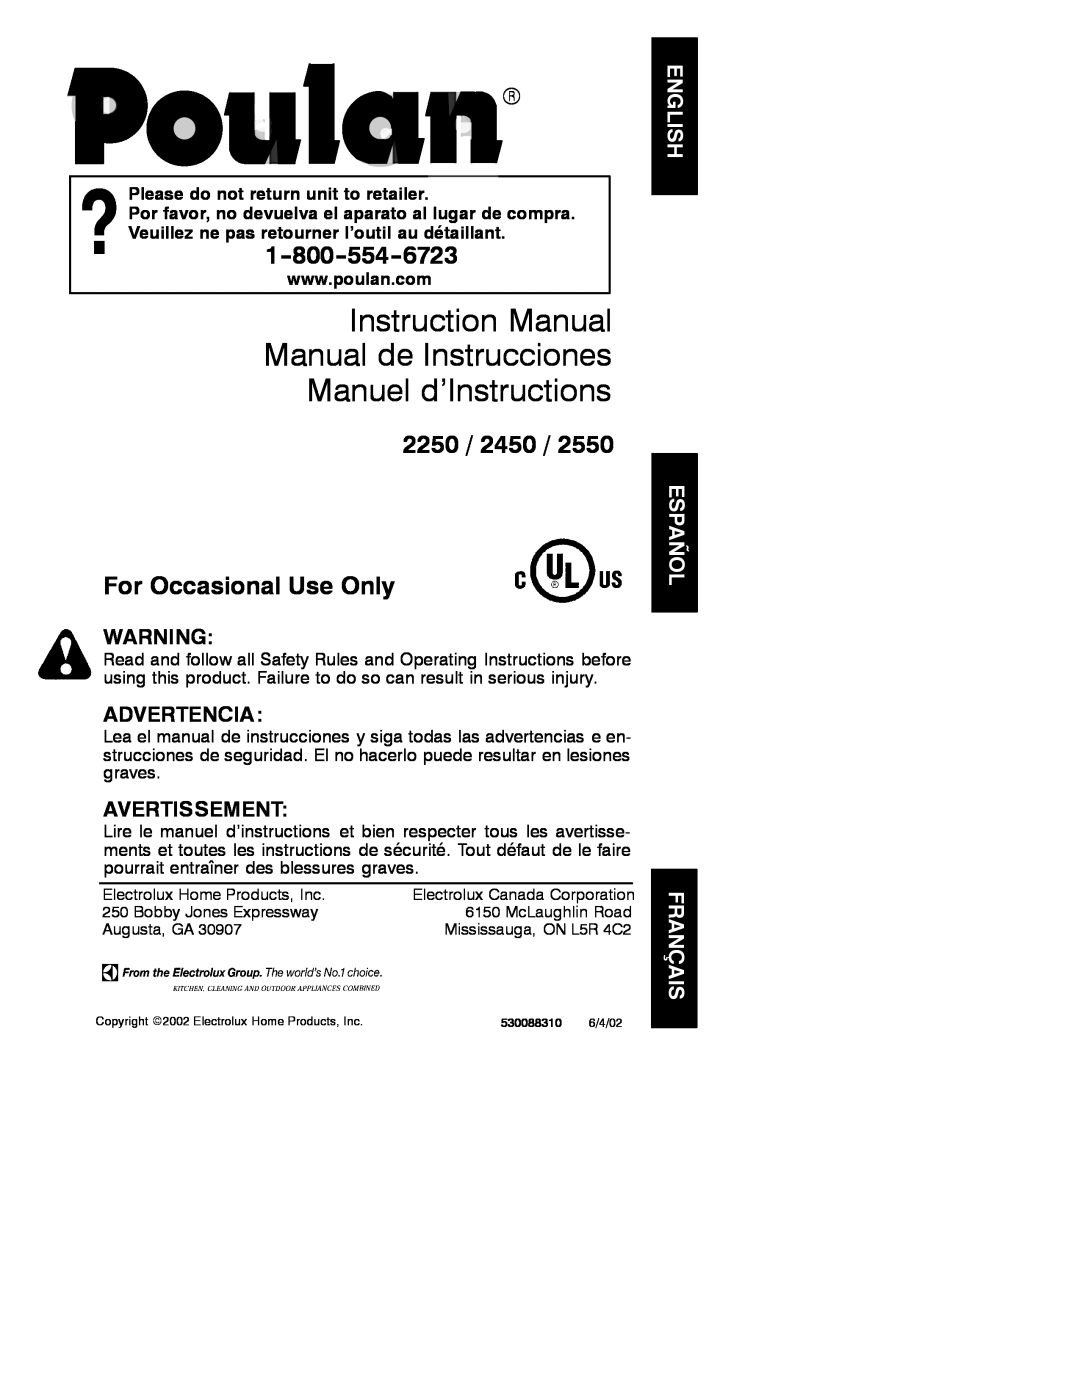 Poulan 2002-06 instruction manual Manuel d’Instructions, 2250 / 2450 / For Occasional Use Only, Advertencia, Avertissement 